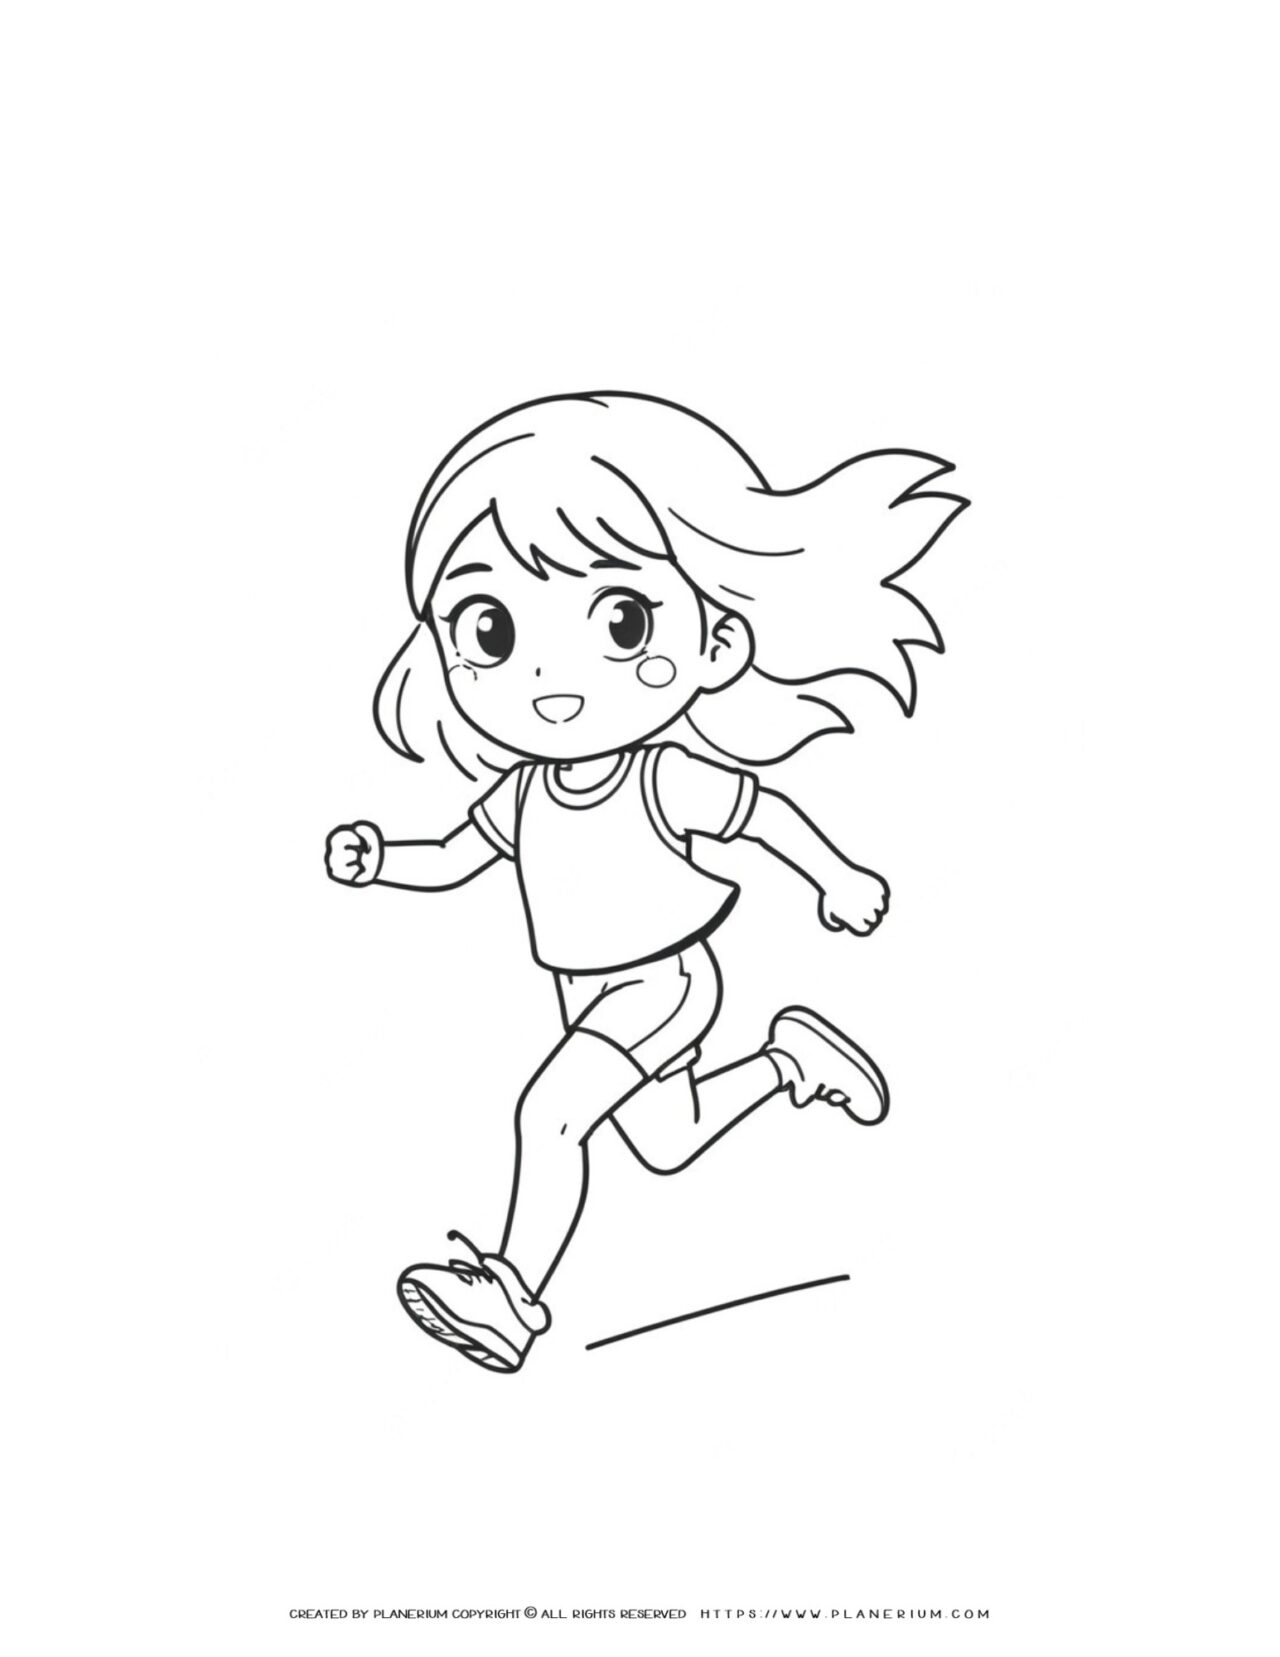 girl-running-coloring-page-for-kids